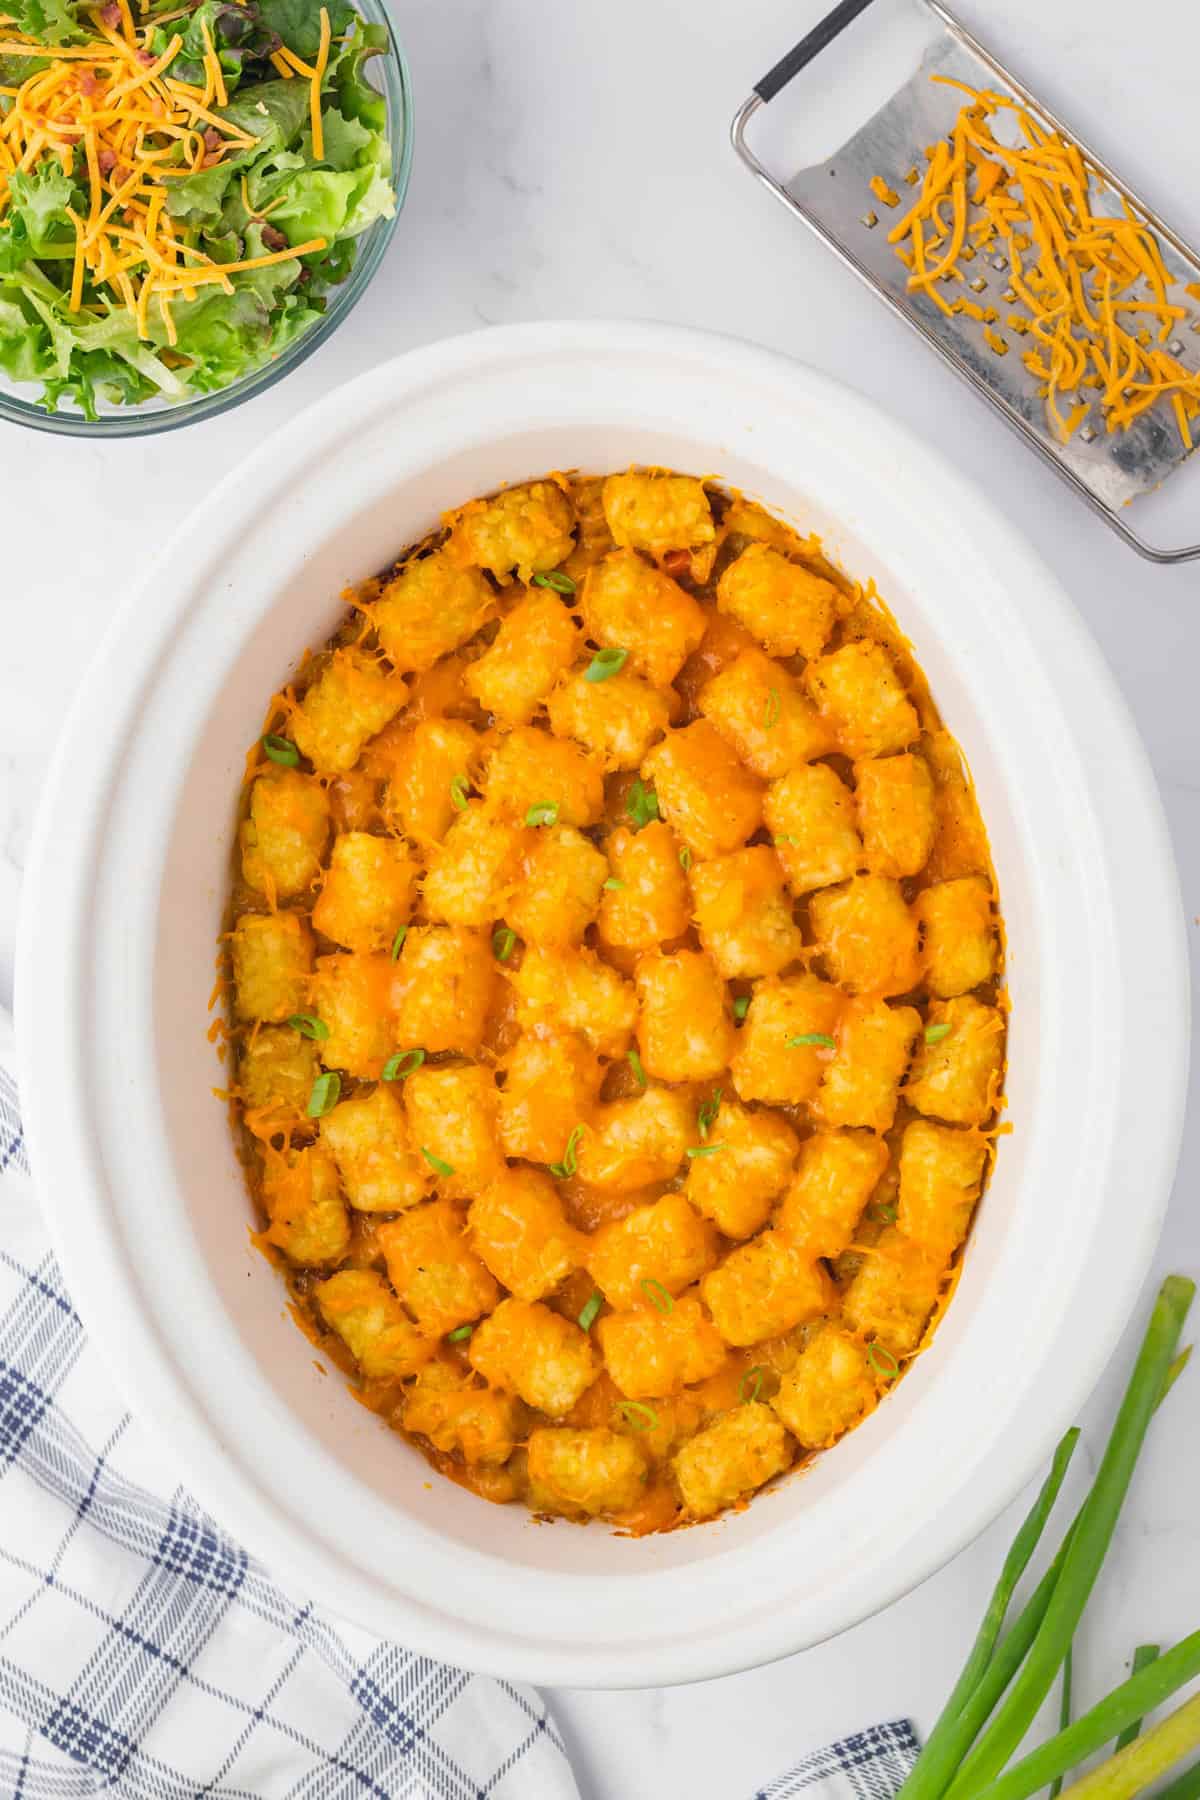 Topping Bacon Cheeseburger Crock Pot Tater Tot Casserole ingredients with cheese